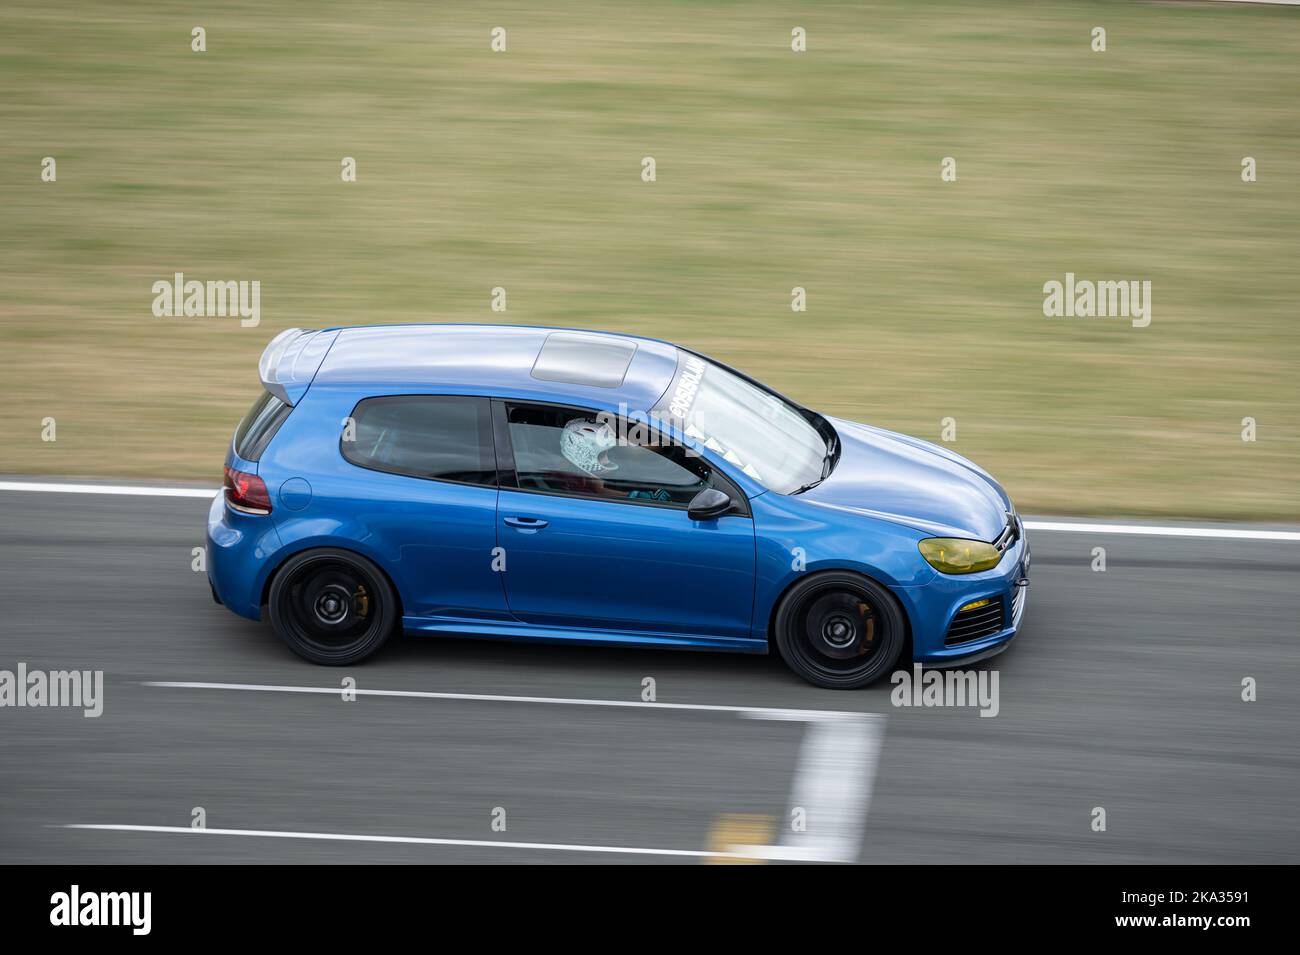 Sixth generation Volkswagen Golf R GTI on the race track Stock Photo